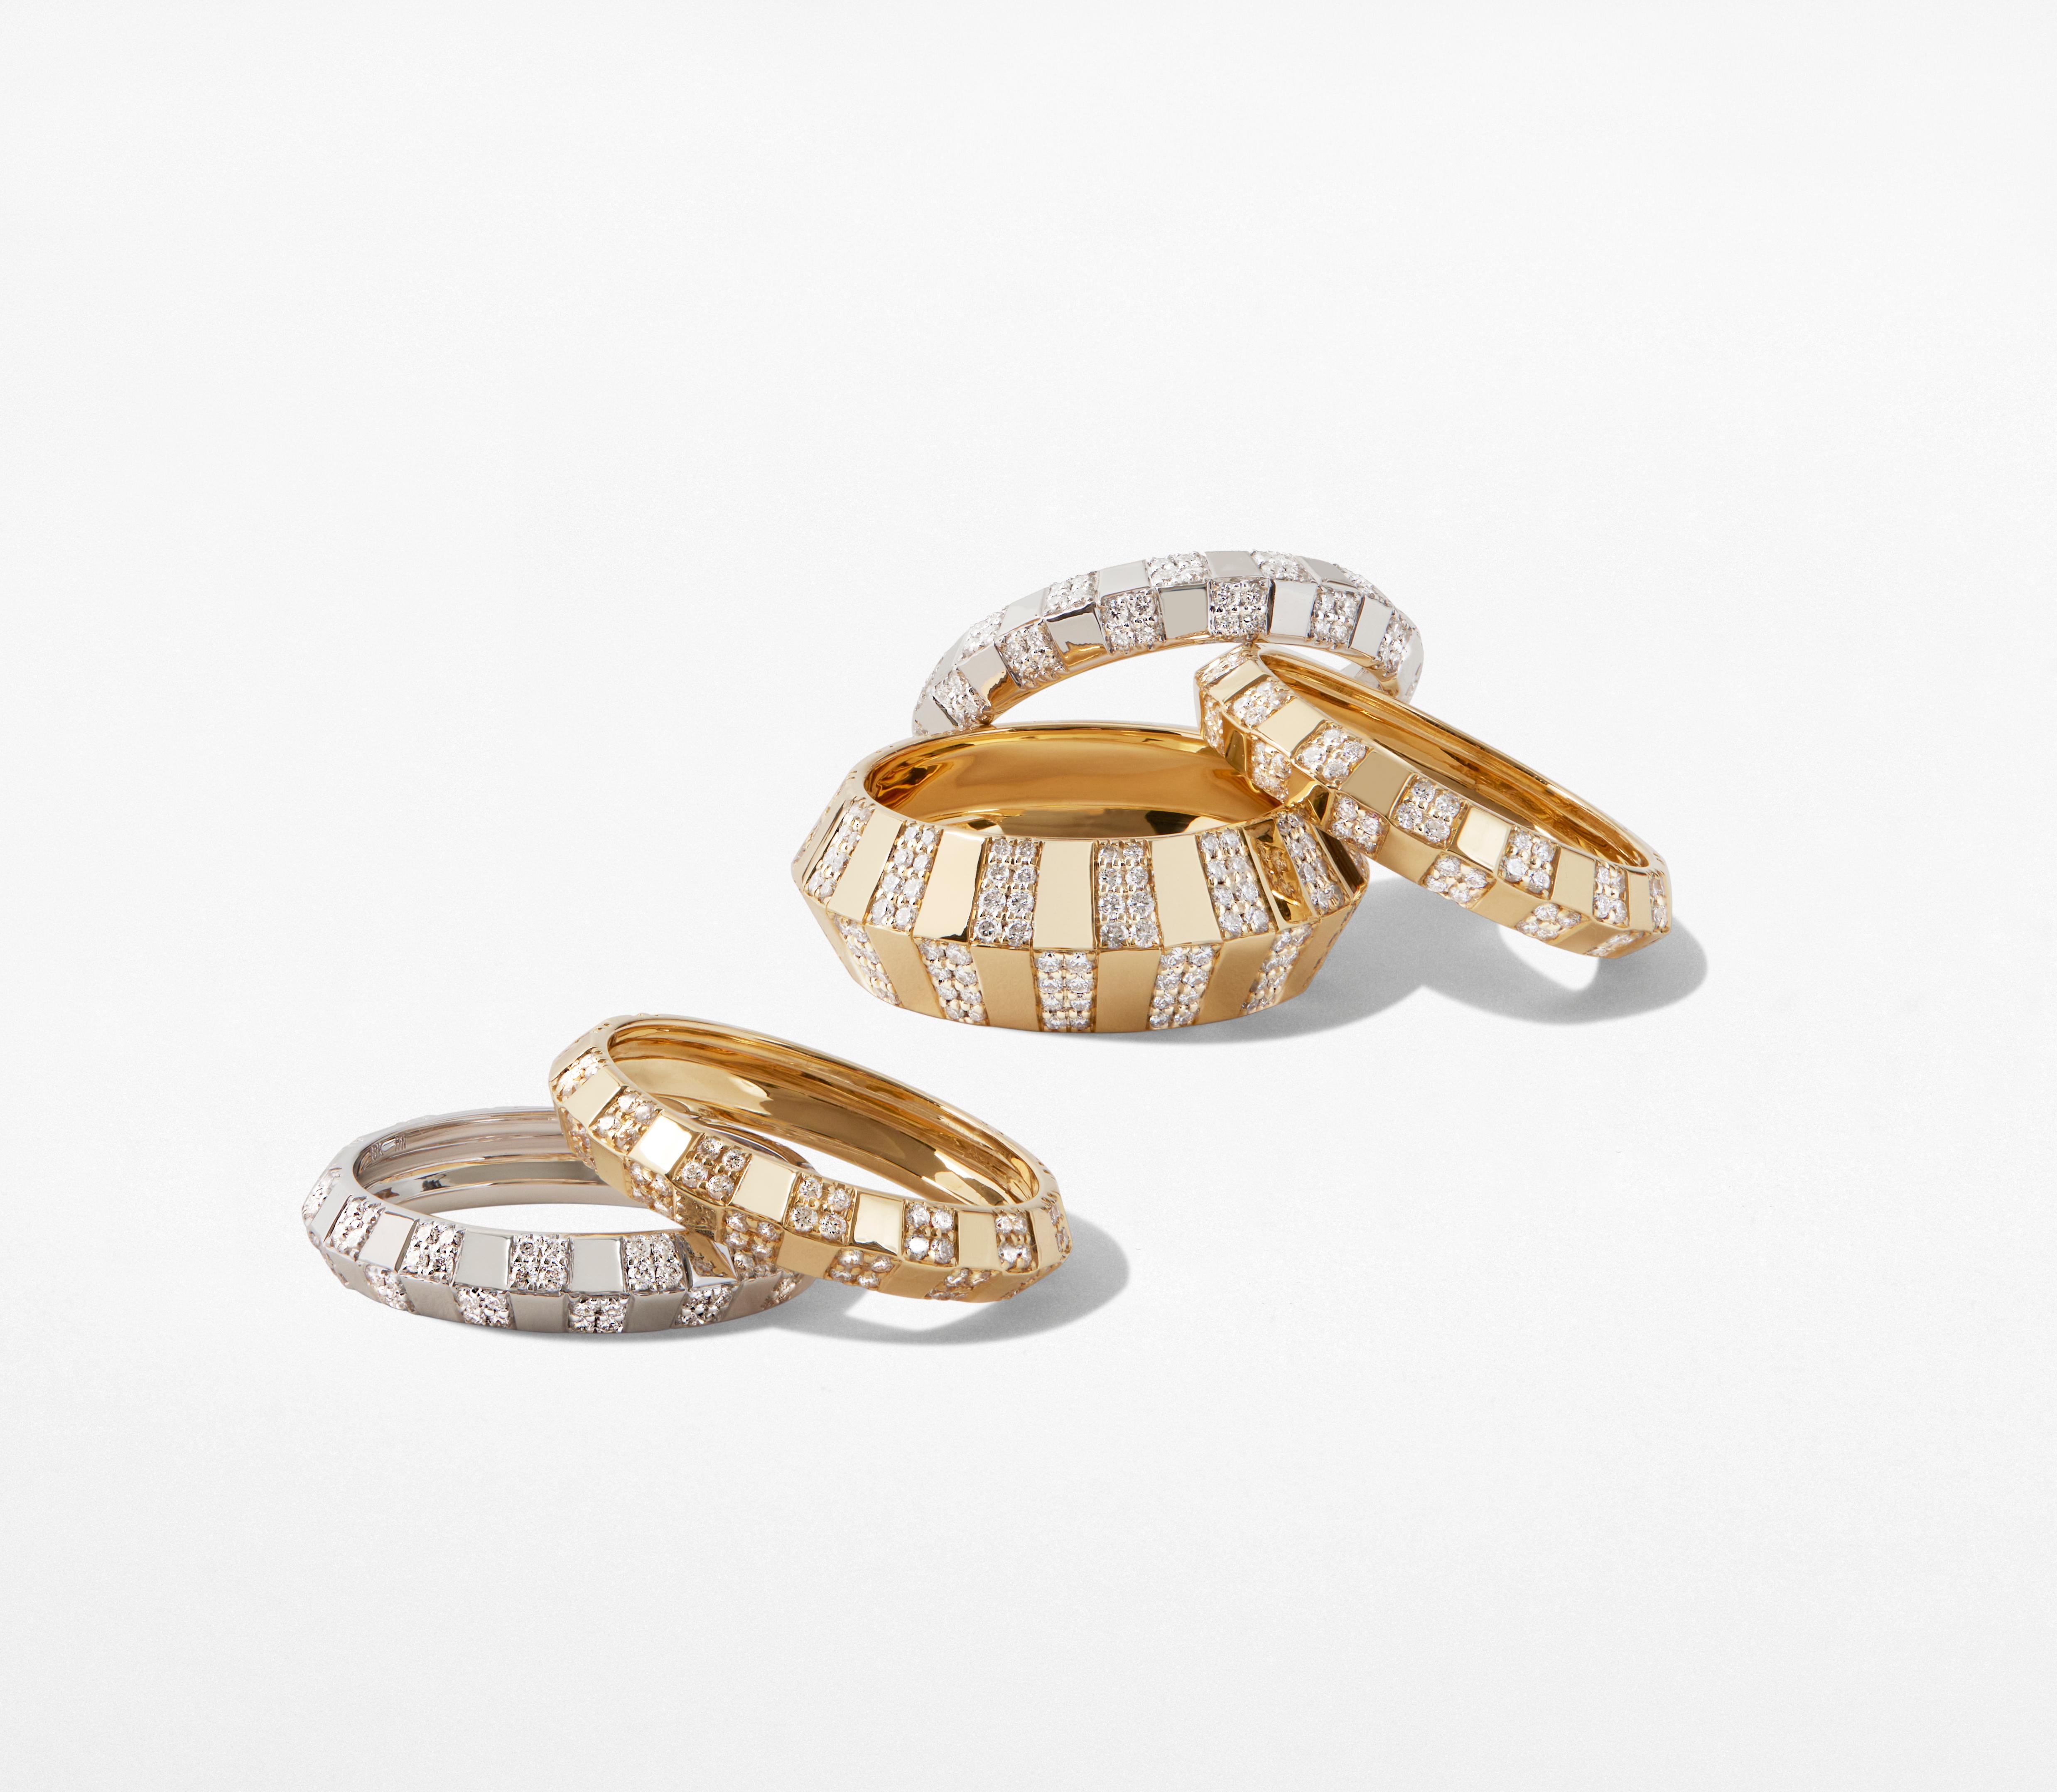 Highly polished 18k yellow gold with 112 hand-set Brilliant Cut diamonds set in a pinstripe pattern define this bold and glamorous  knife edge ring. With its bold and sturdy feel, this collection symbolizes strength and power. This stackable ring